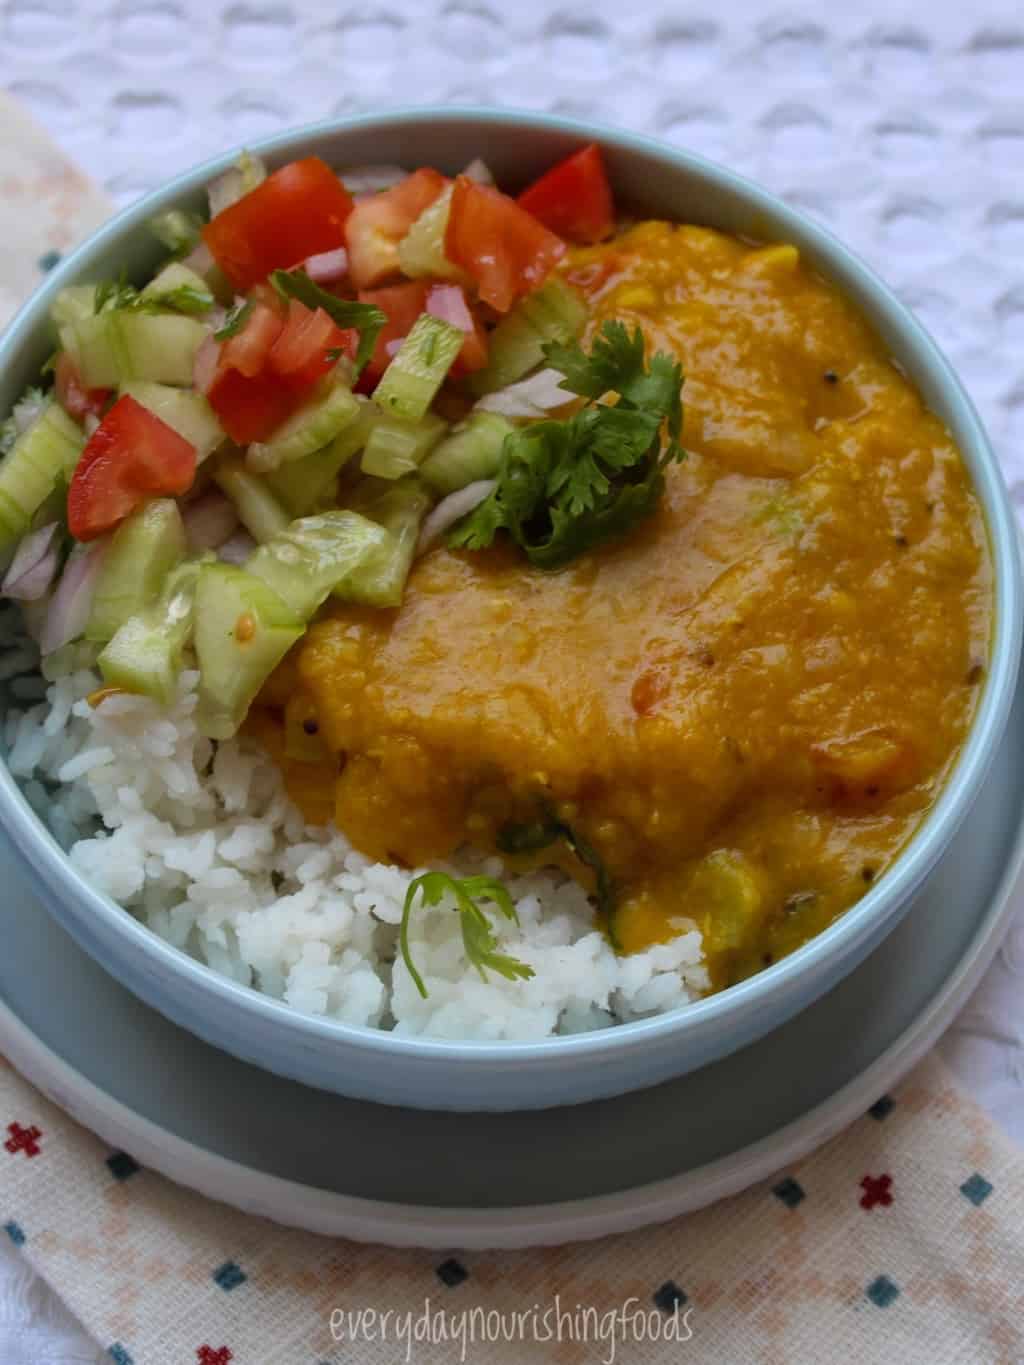 red lentils dal with rice and salad in a bowl